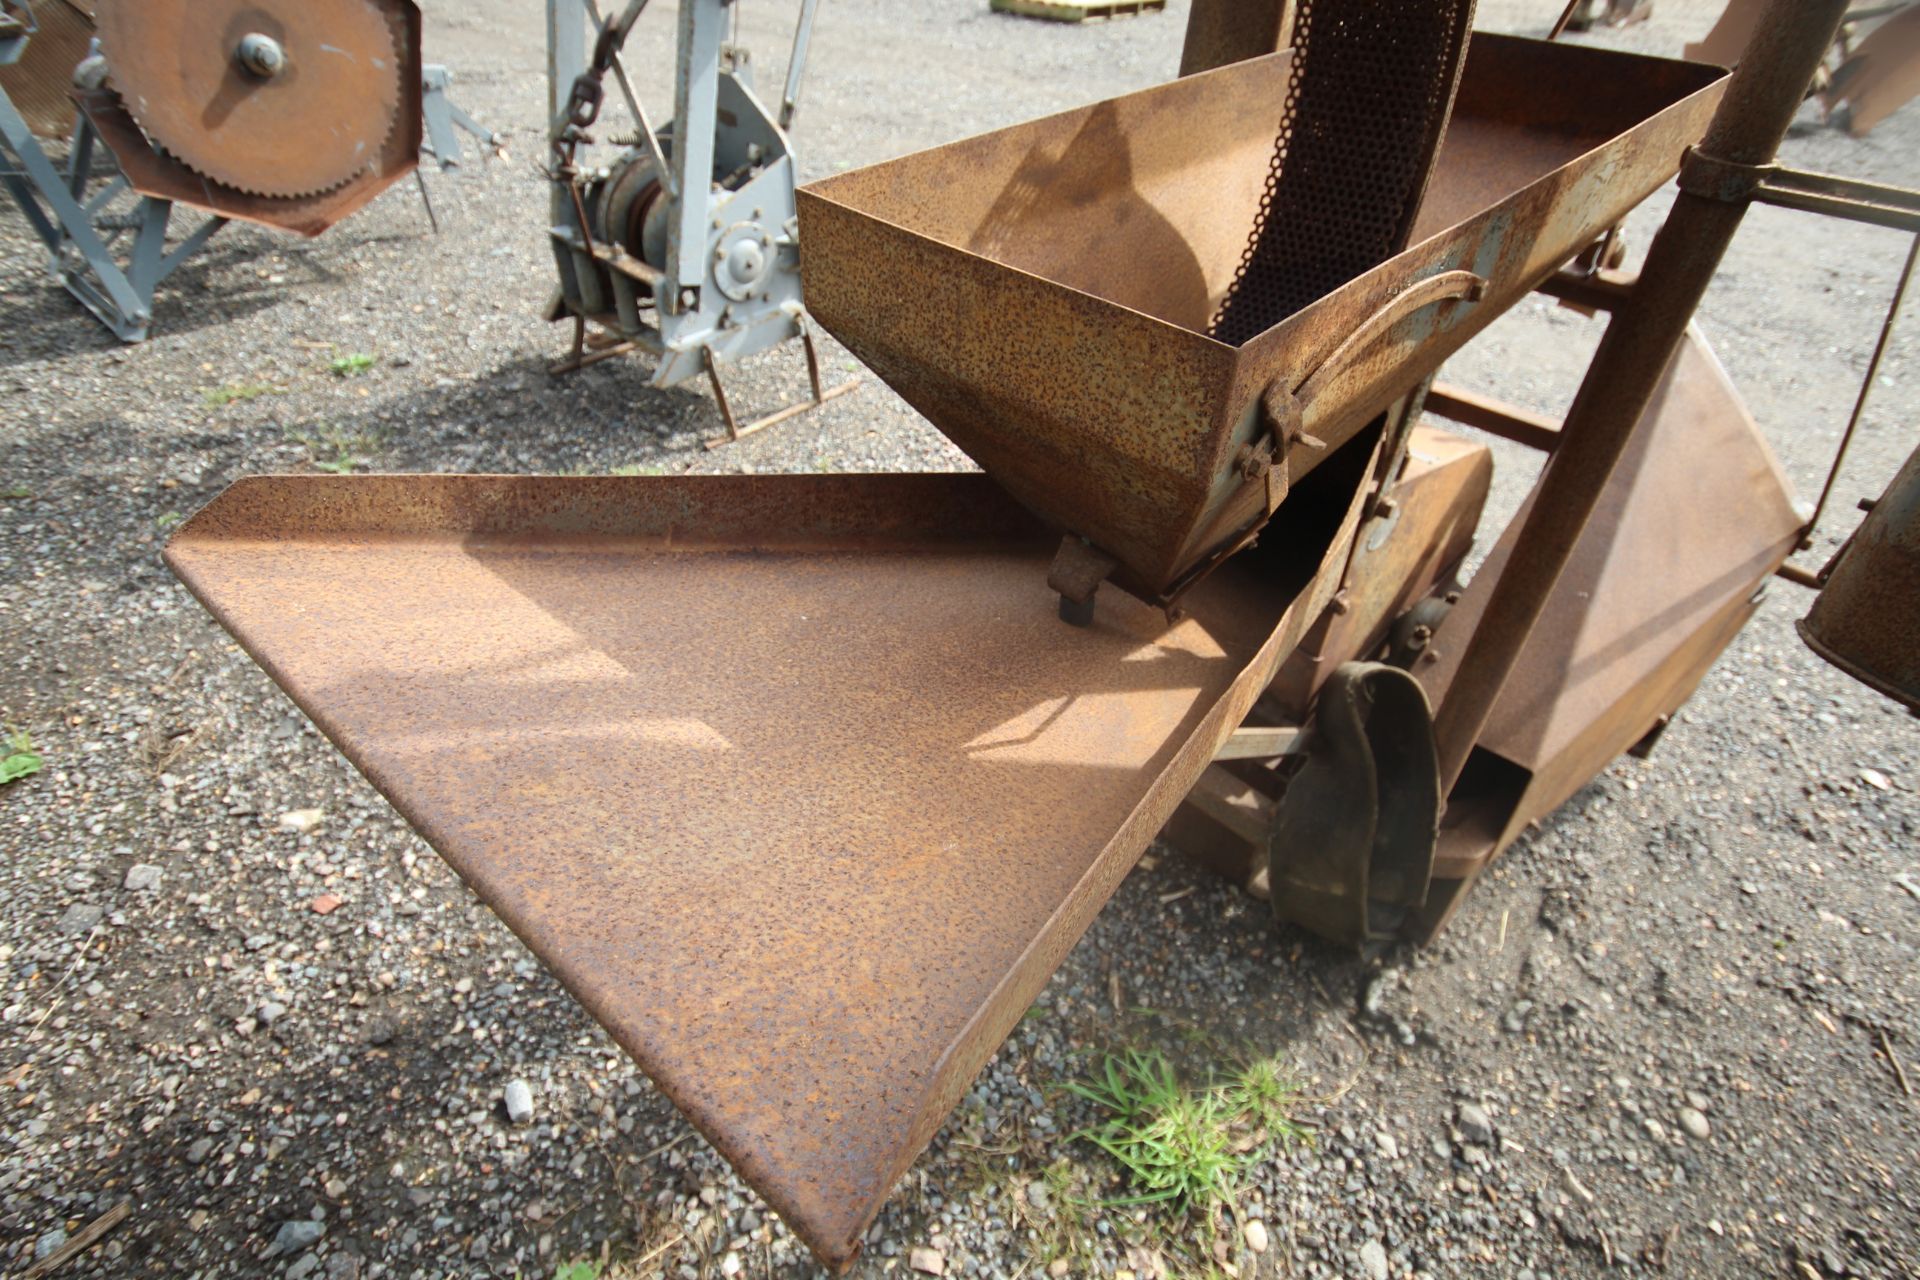 Ferguson Portable Hammer Mill. Model Number H-LE-A20. Serial Number HFM605. With various screens. - Image 17 of 18